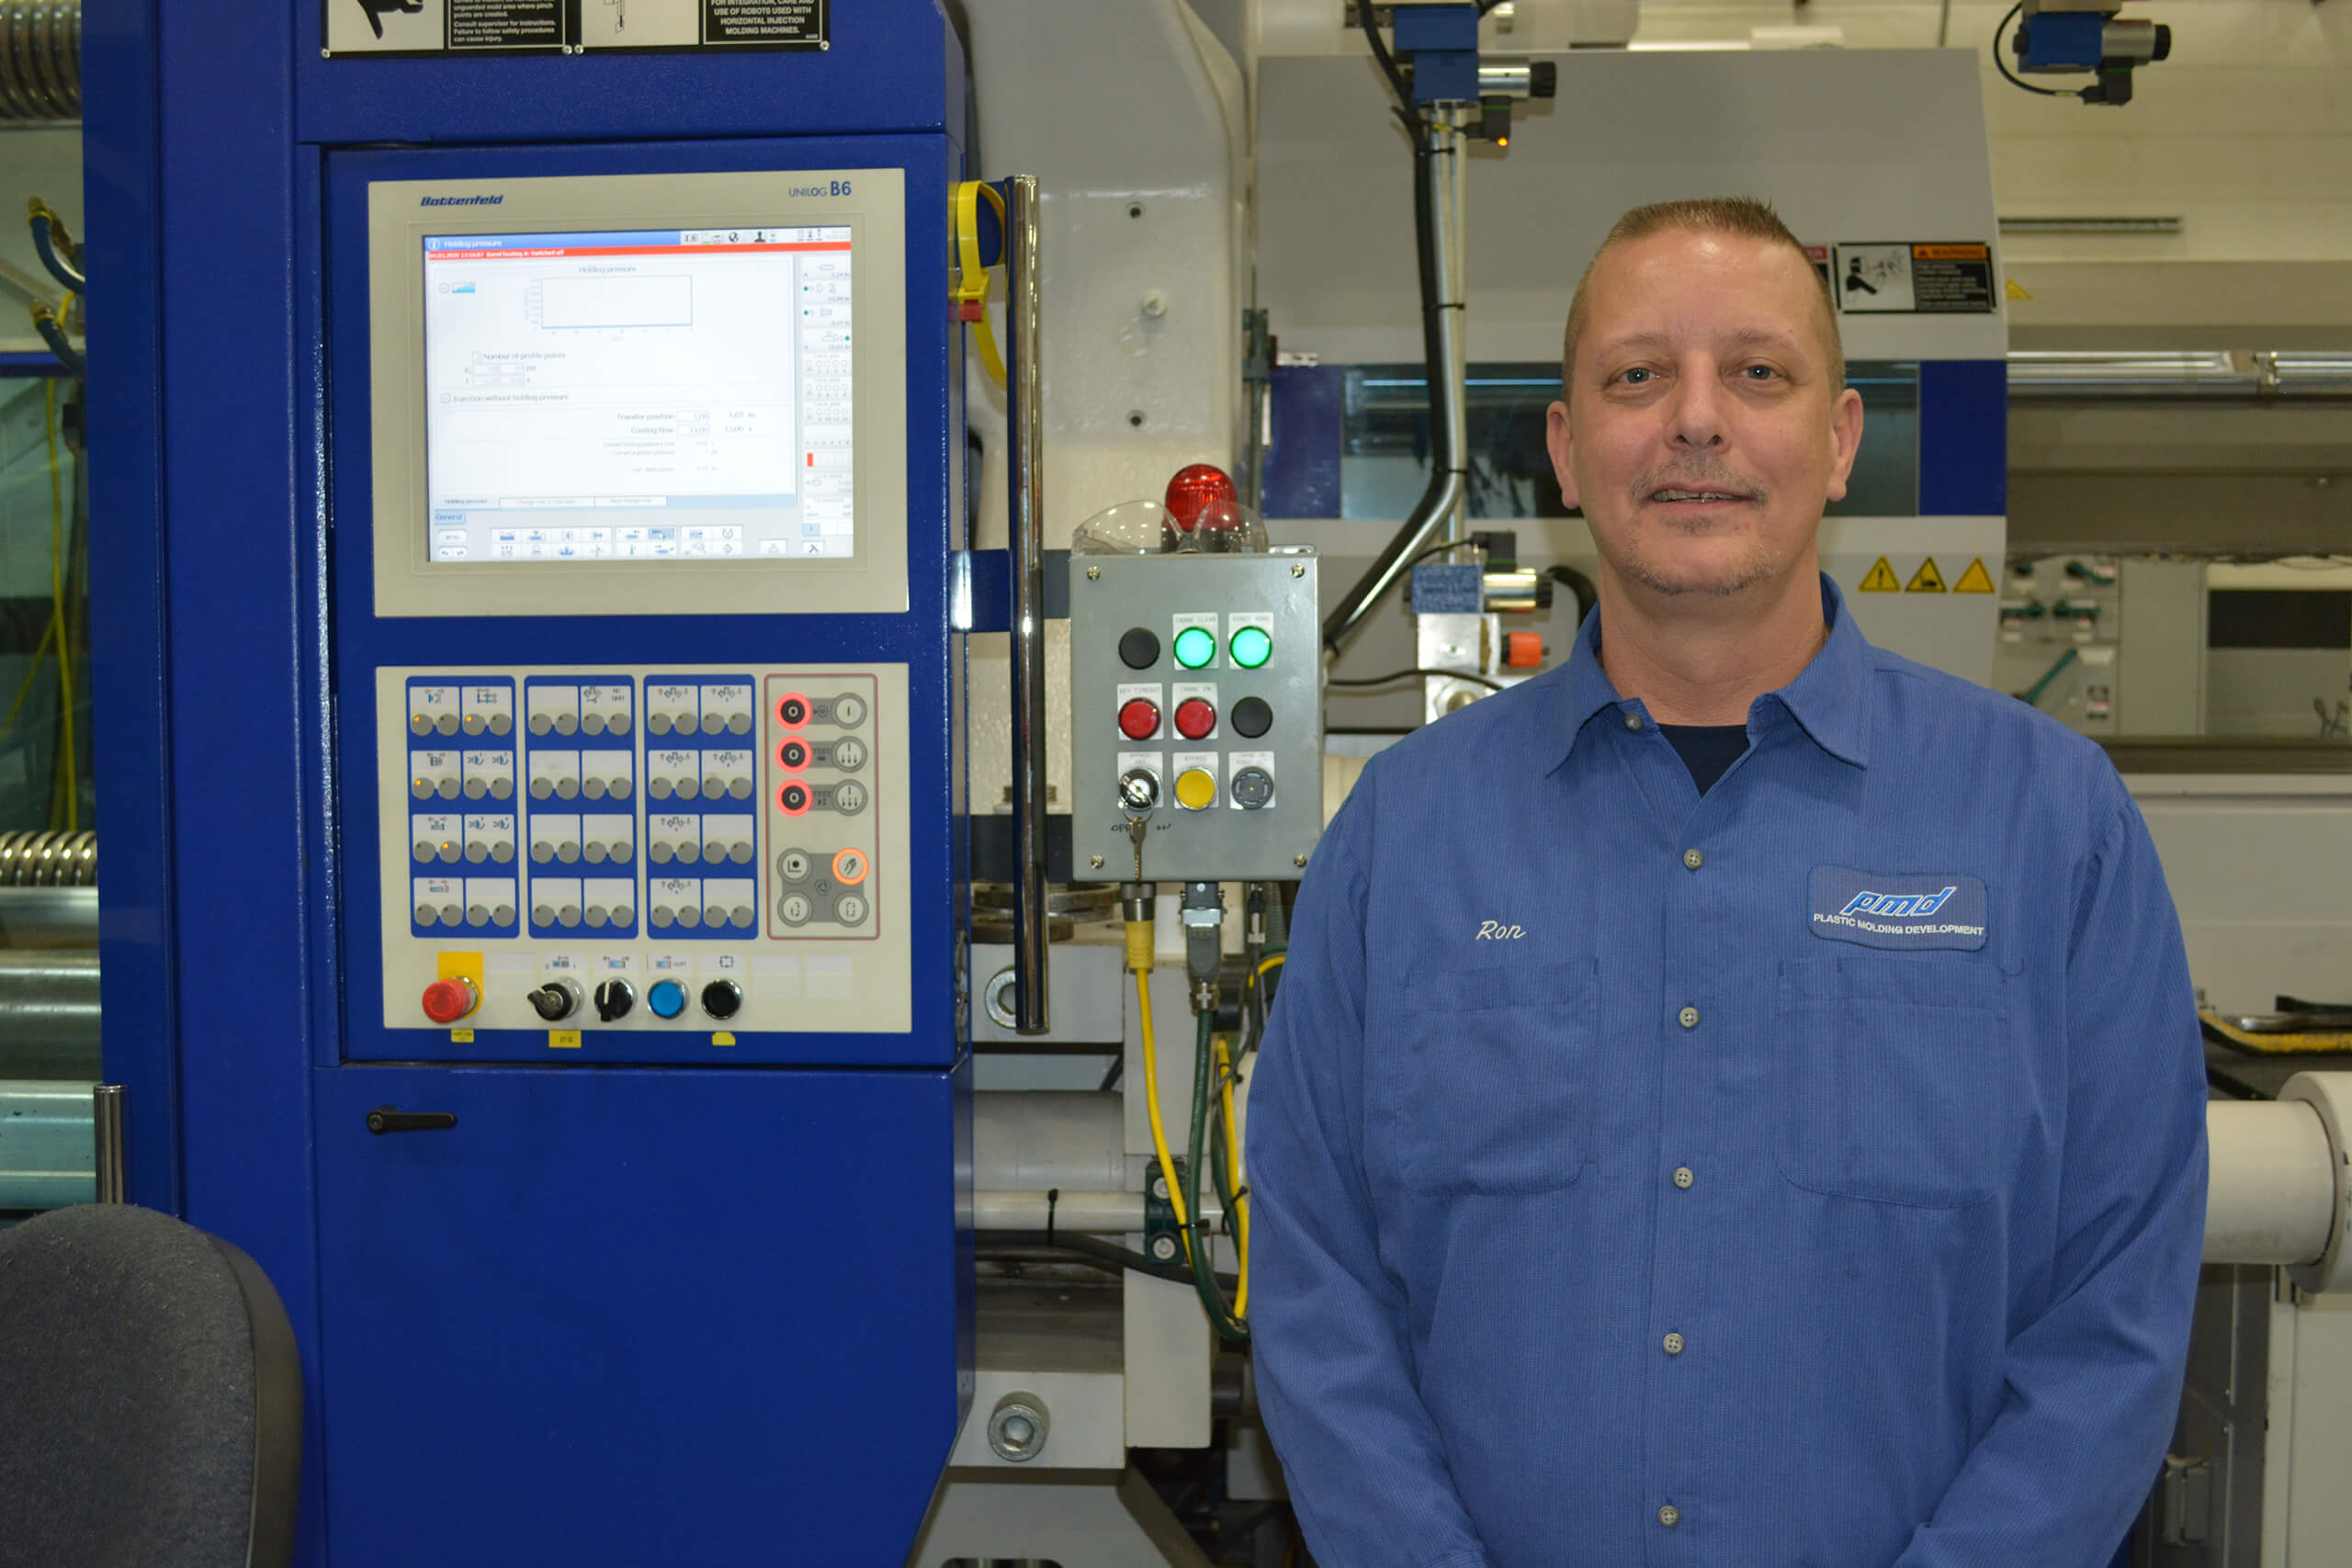 Plastic Molding Development is known for its company culture. Ron Gibson has been working here since he was 18 and apprenticed under founder Albie Kitts.